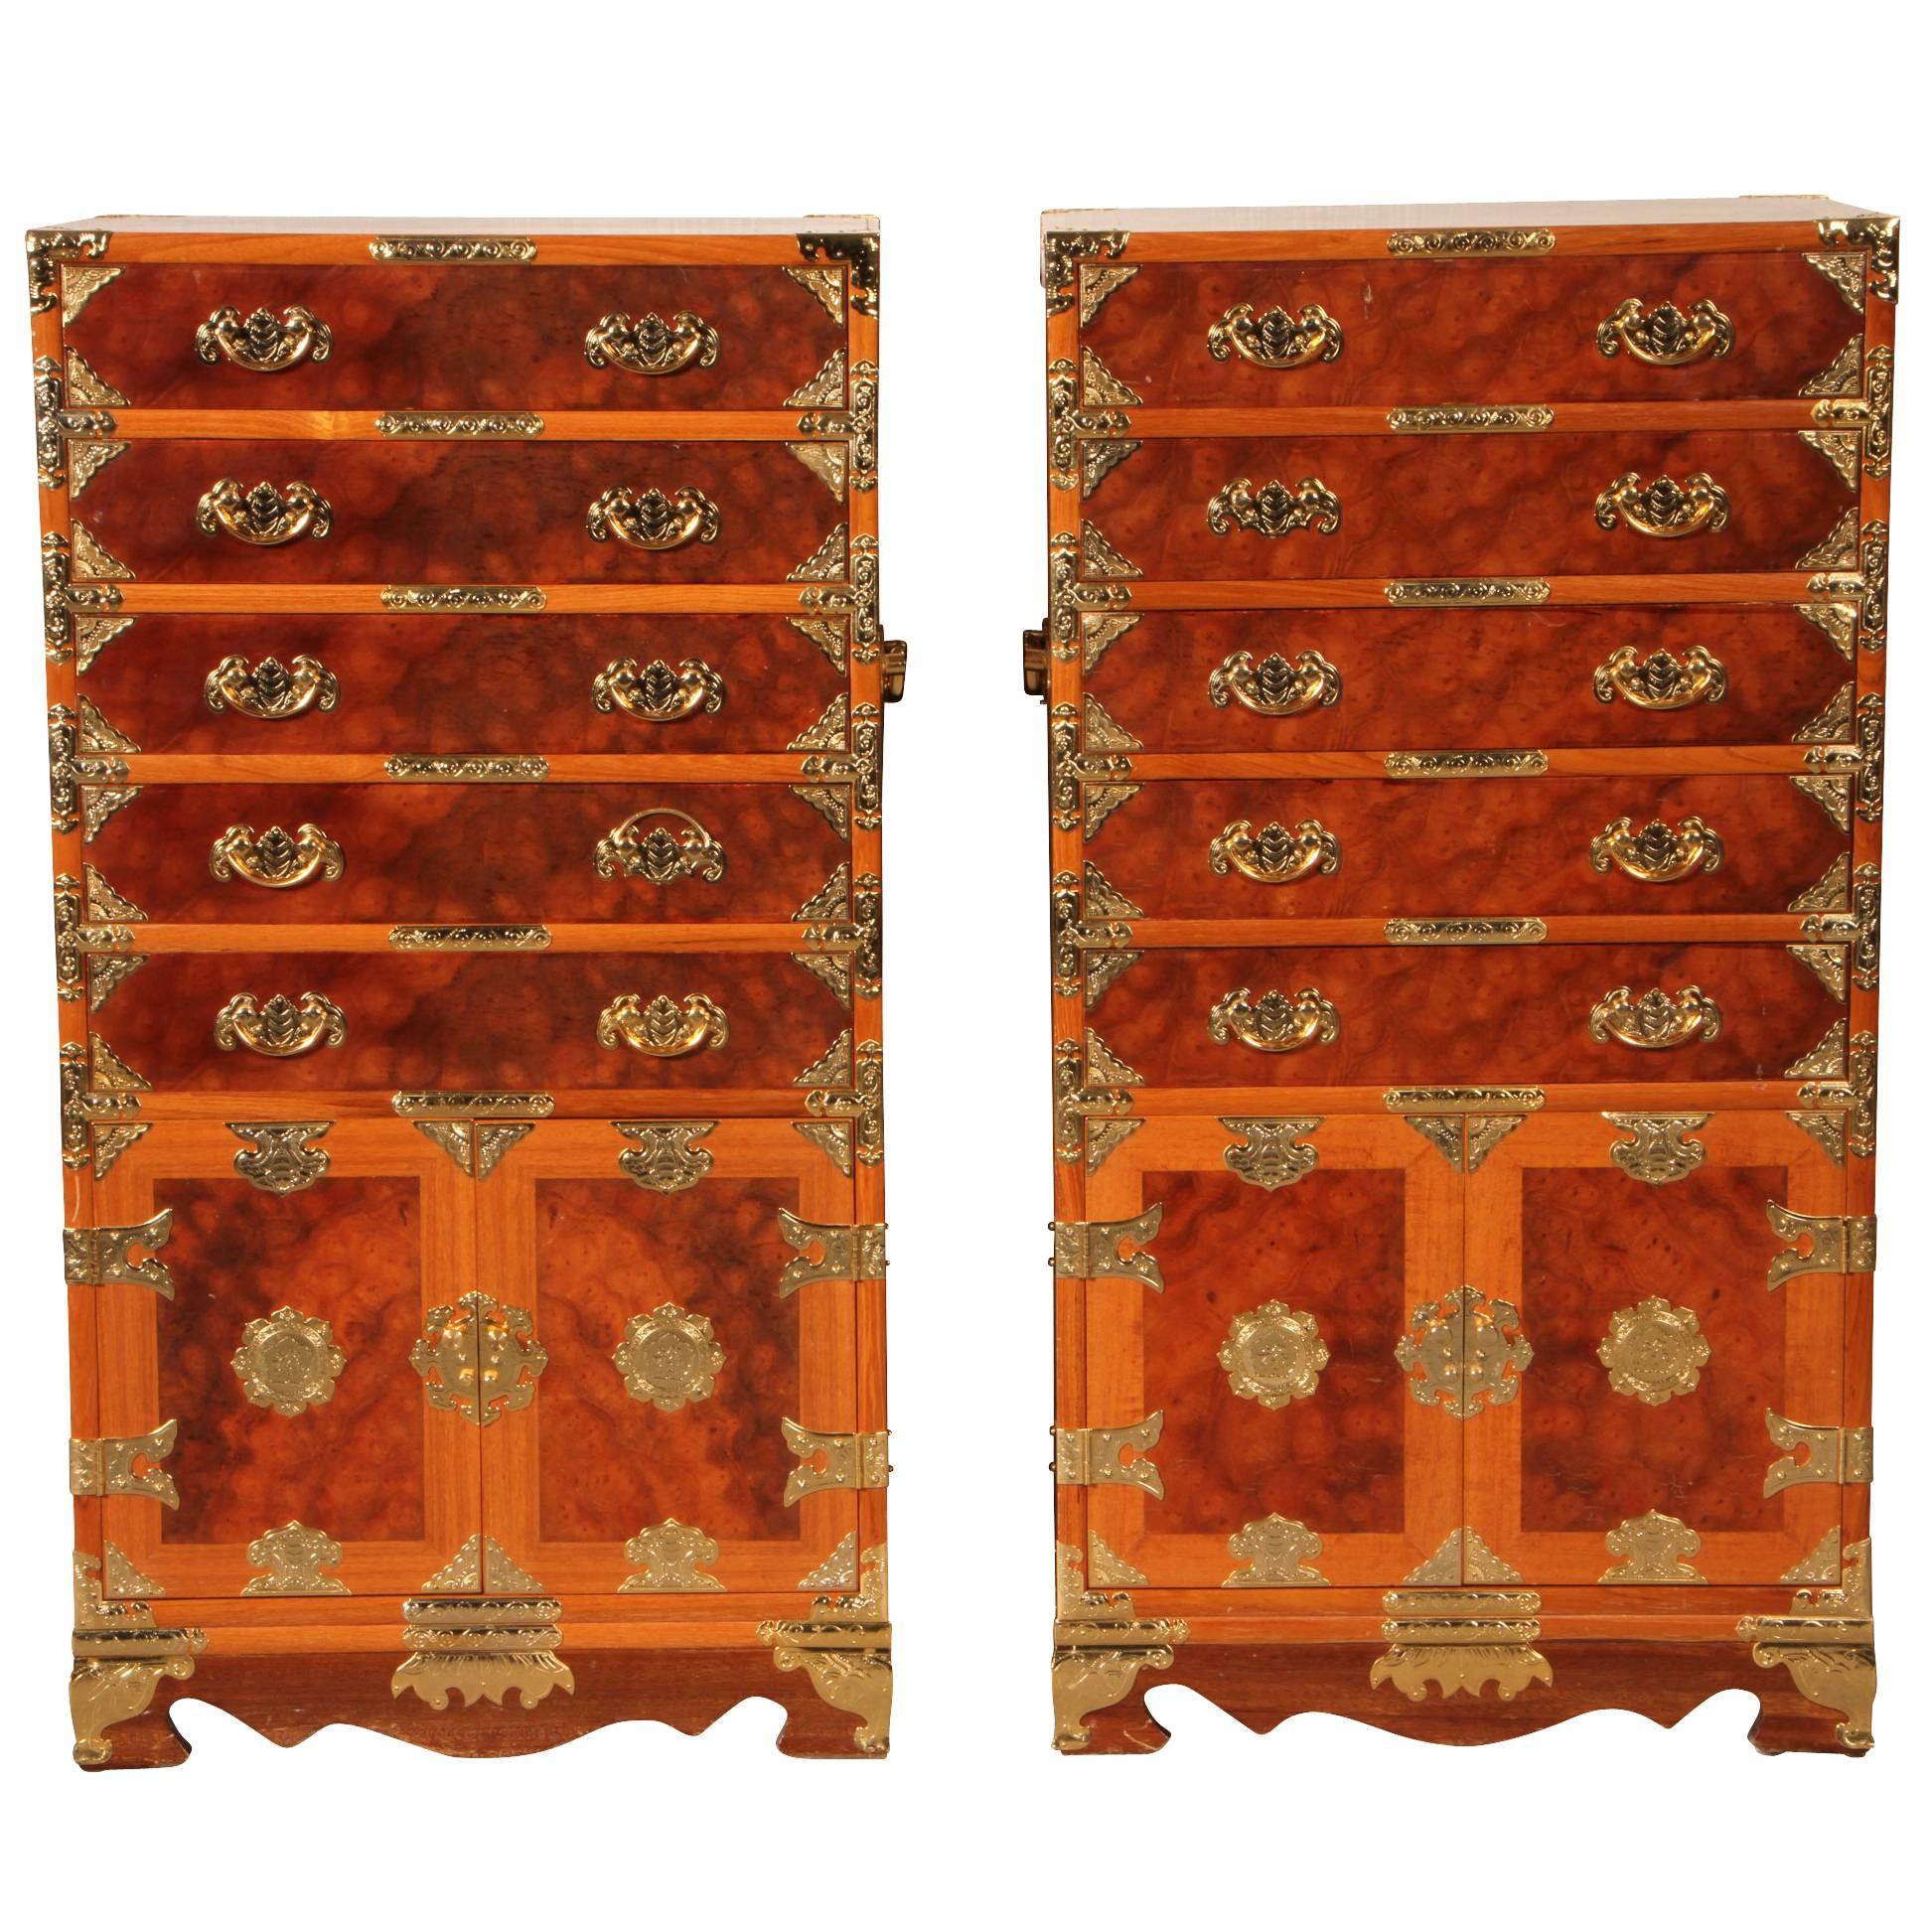 Pair of Korean Matched Silver Chests in Teak and Burl